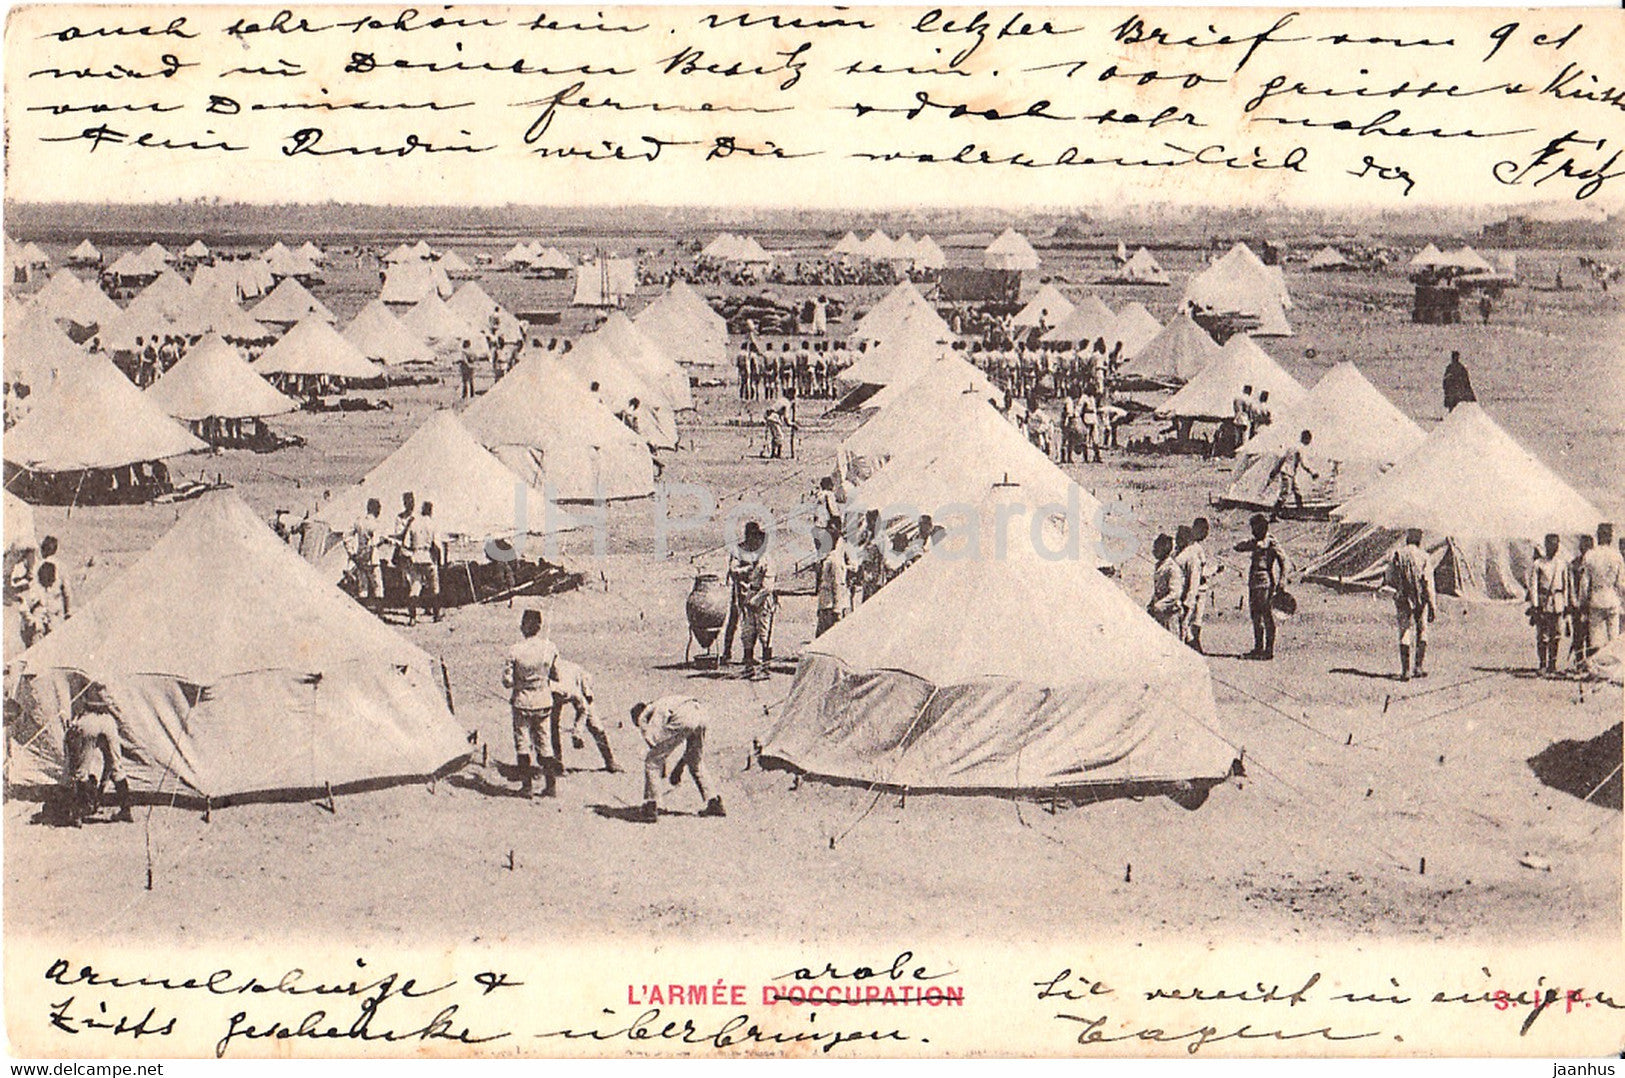 L'Armee D'Occupation - occupying army - military - 335 - old postcard - 1909 - Egypt - used - JH Postcards